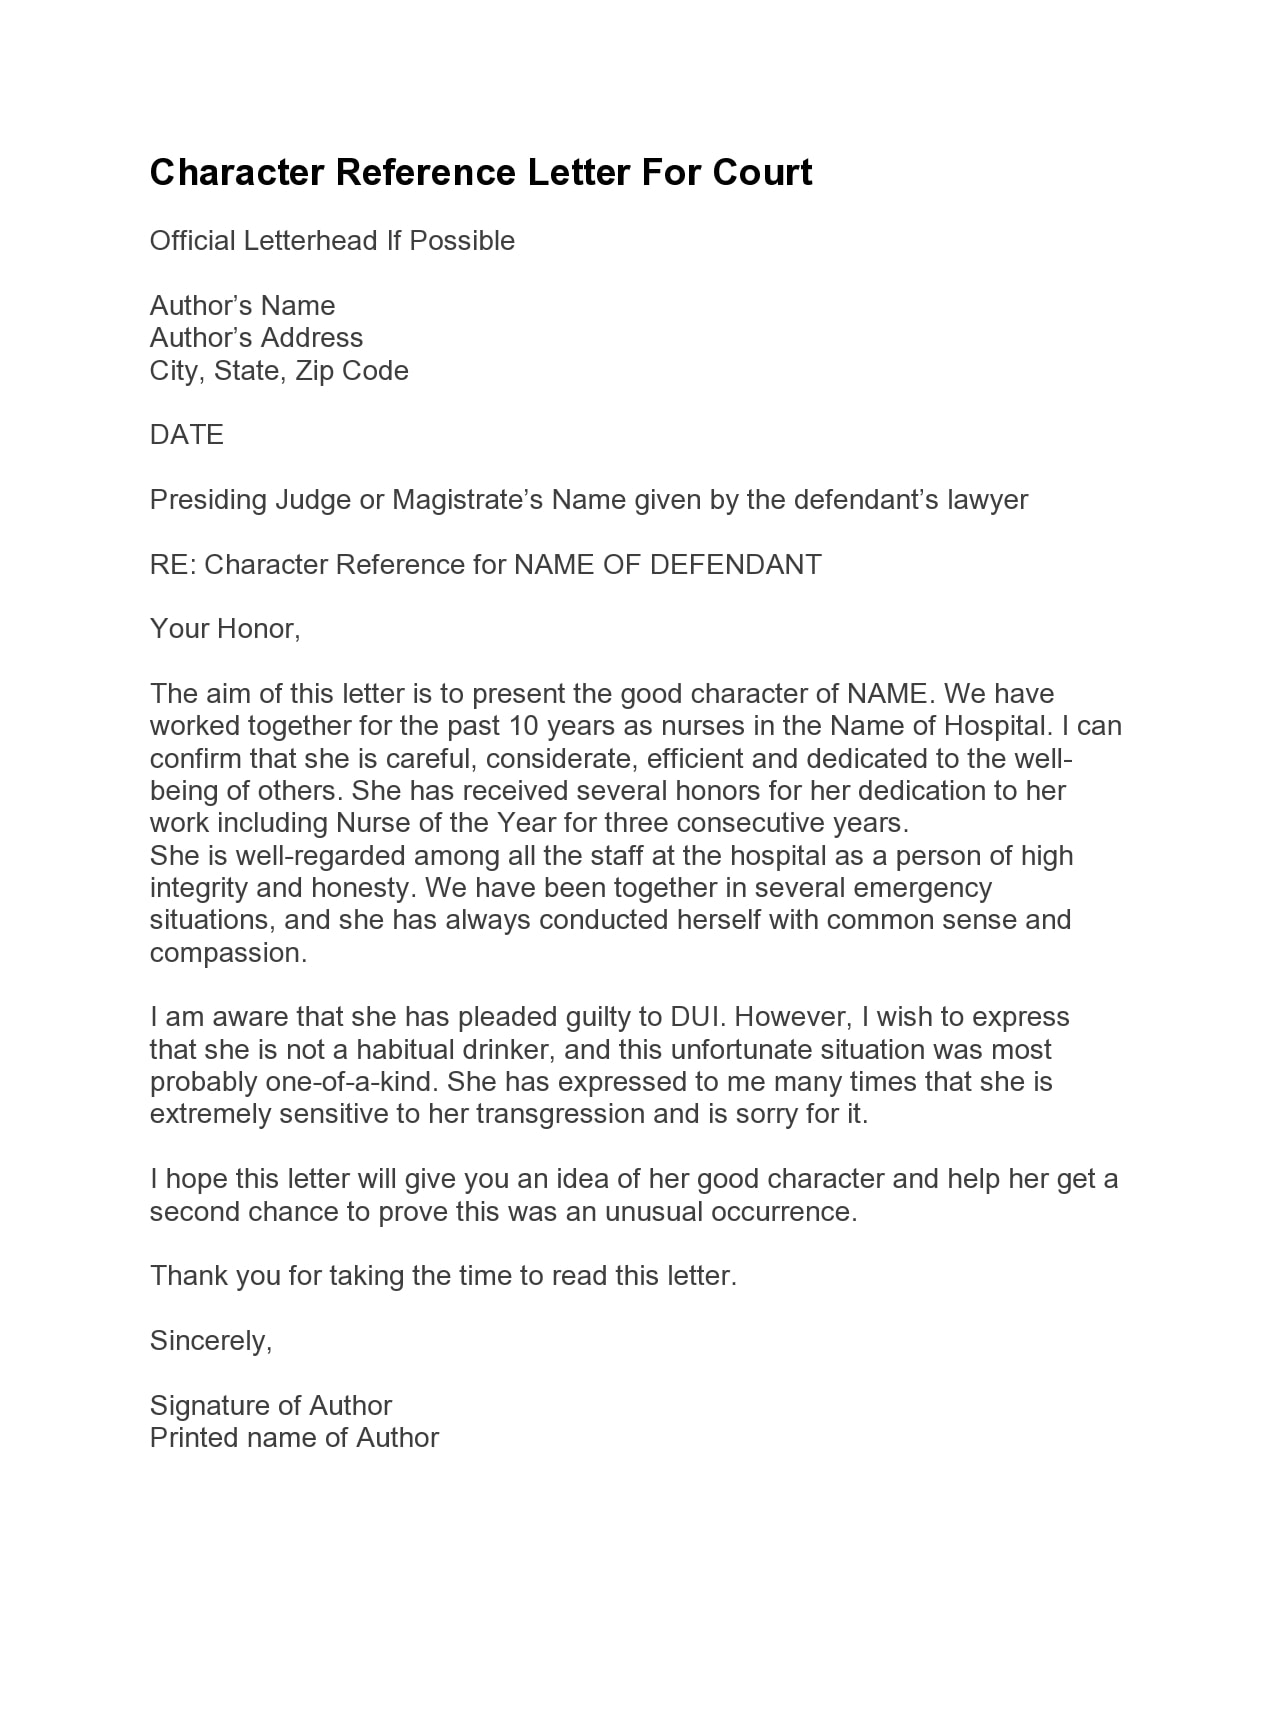 Character Letter To Judge Example Character Reference Letter For